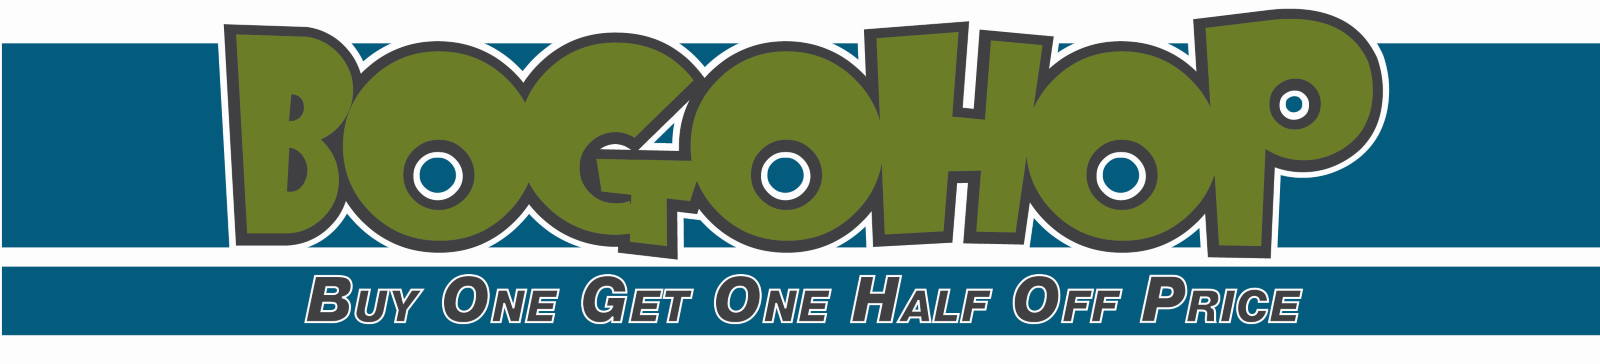 Buy One Get One Half Off Price at Pilot Rock page image